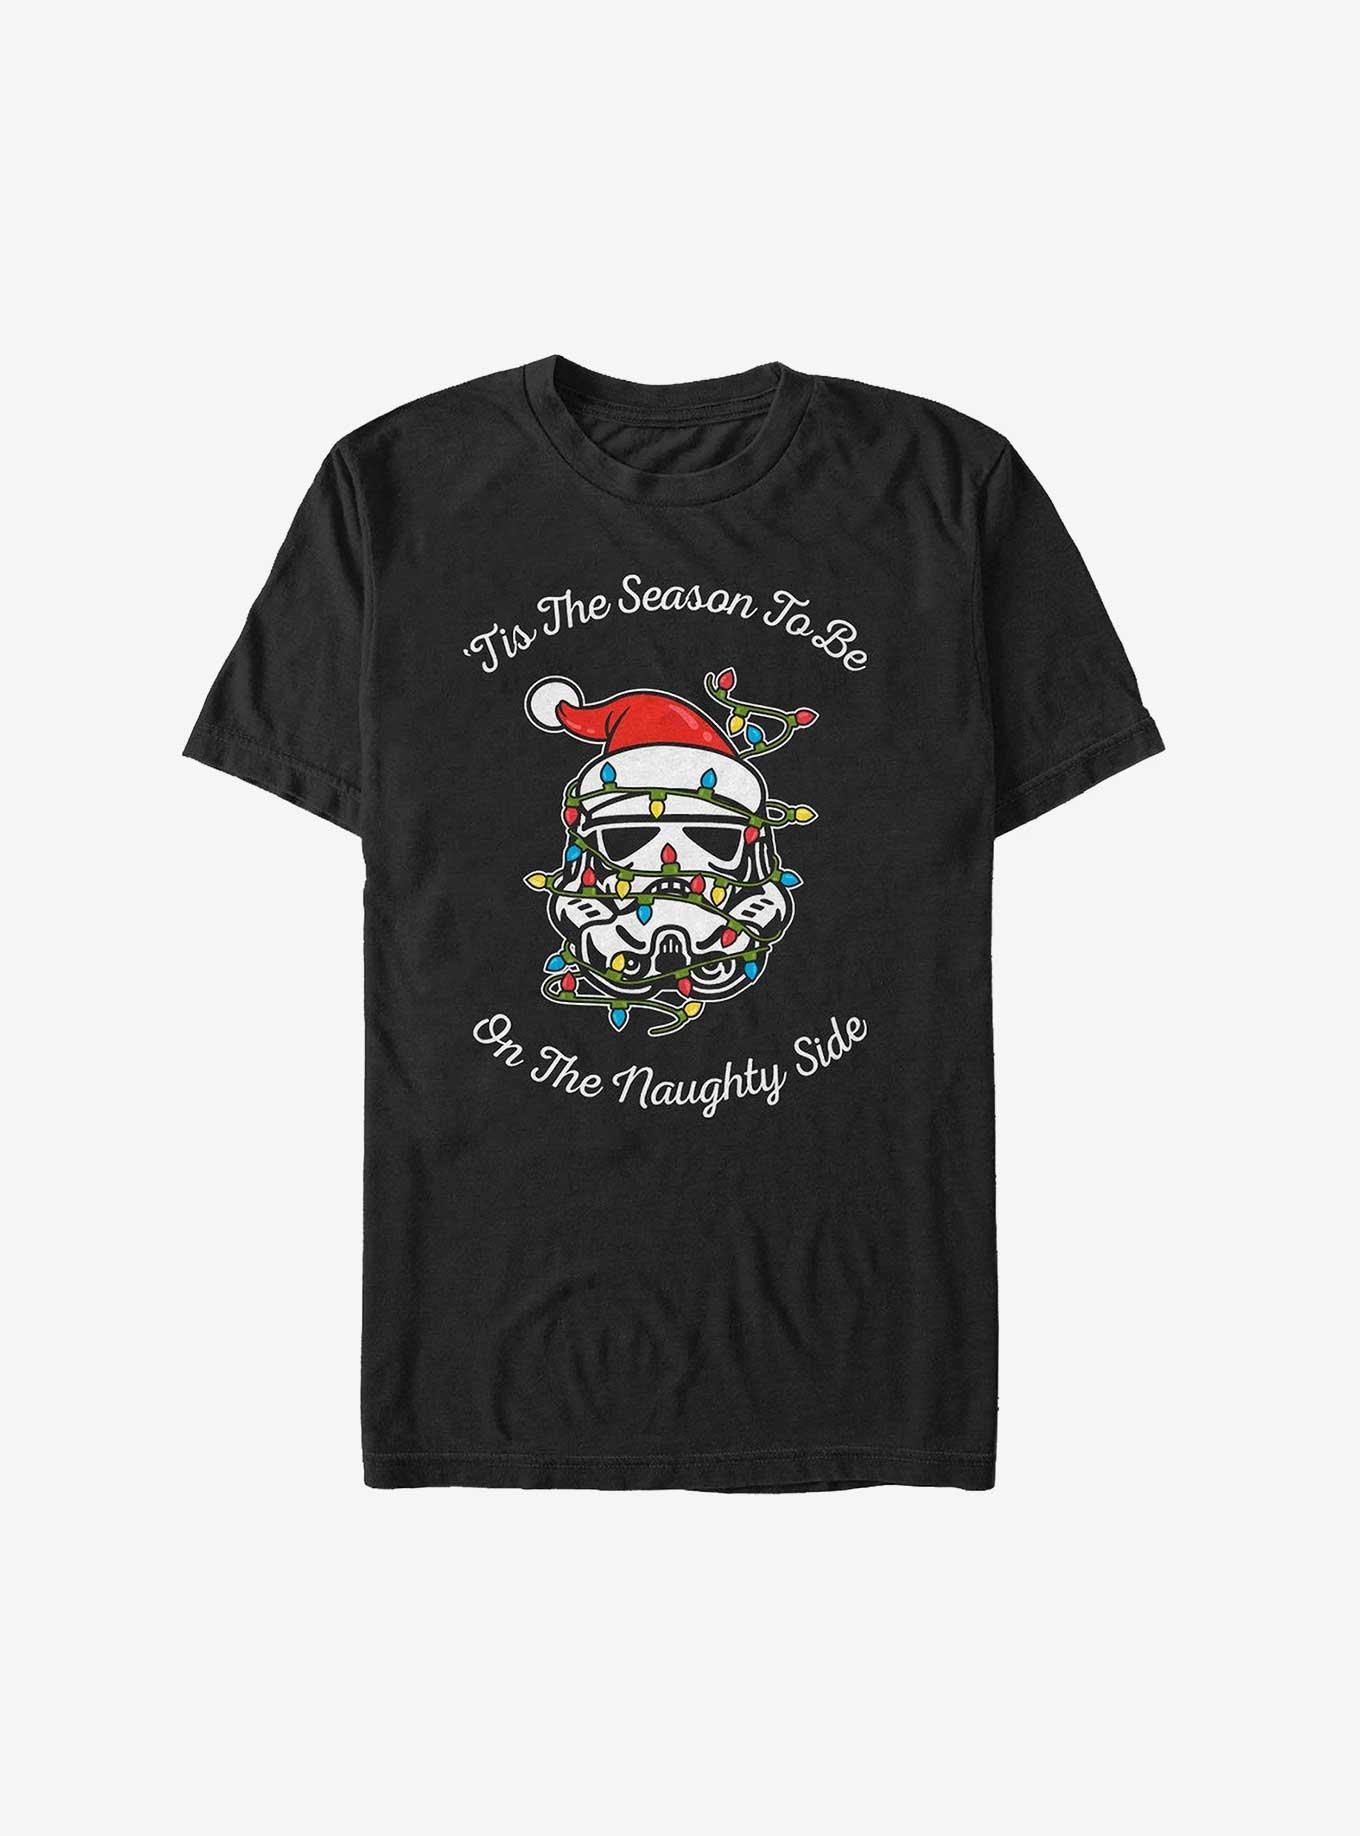 Star Wars 'Tis The Season To Be On The Naughty Side T-Shirt, BLACK, hi-res